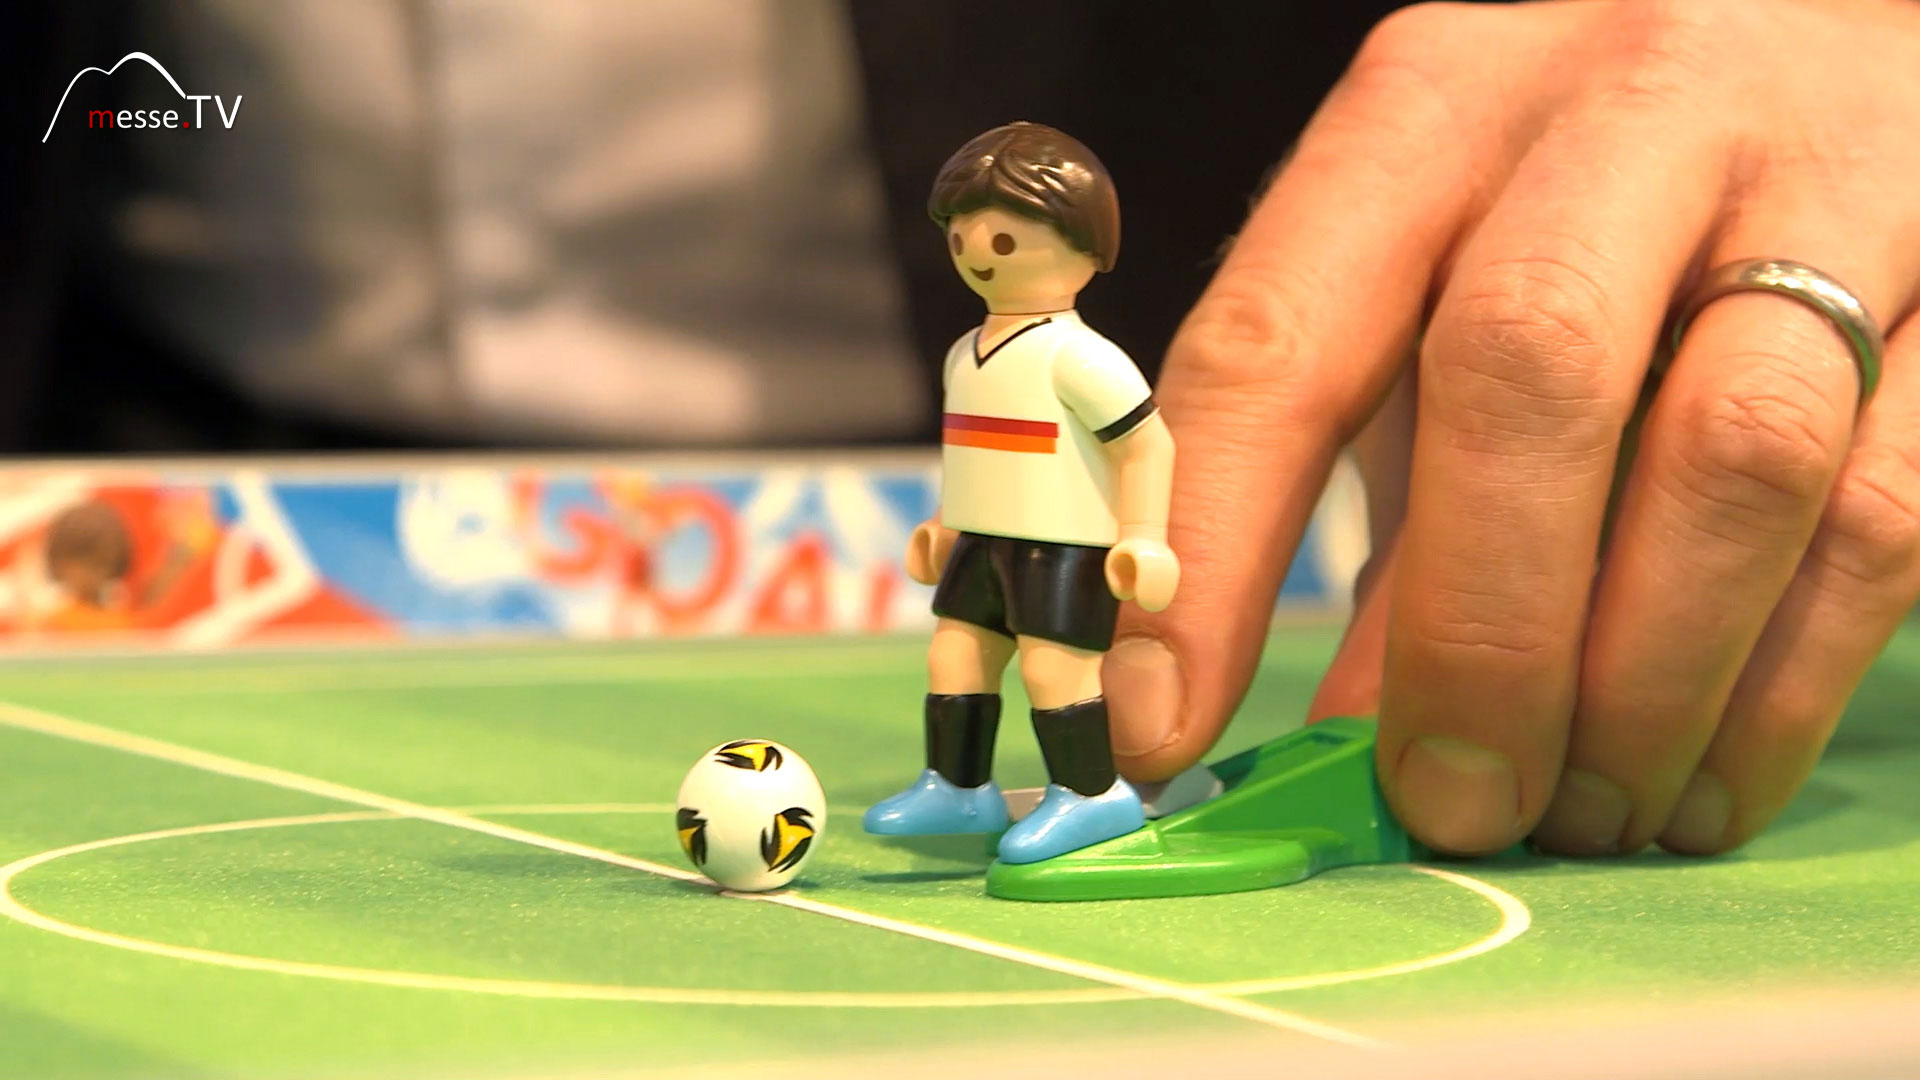 Football player from Playmobil